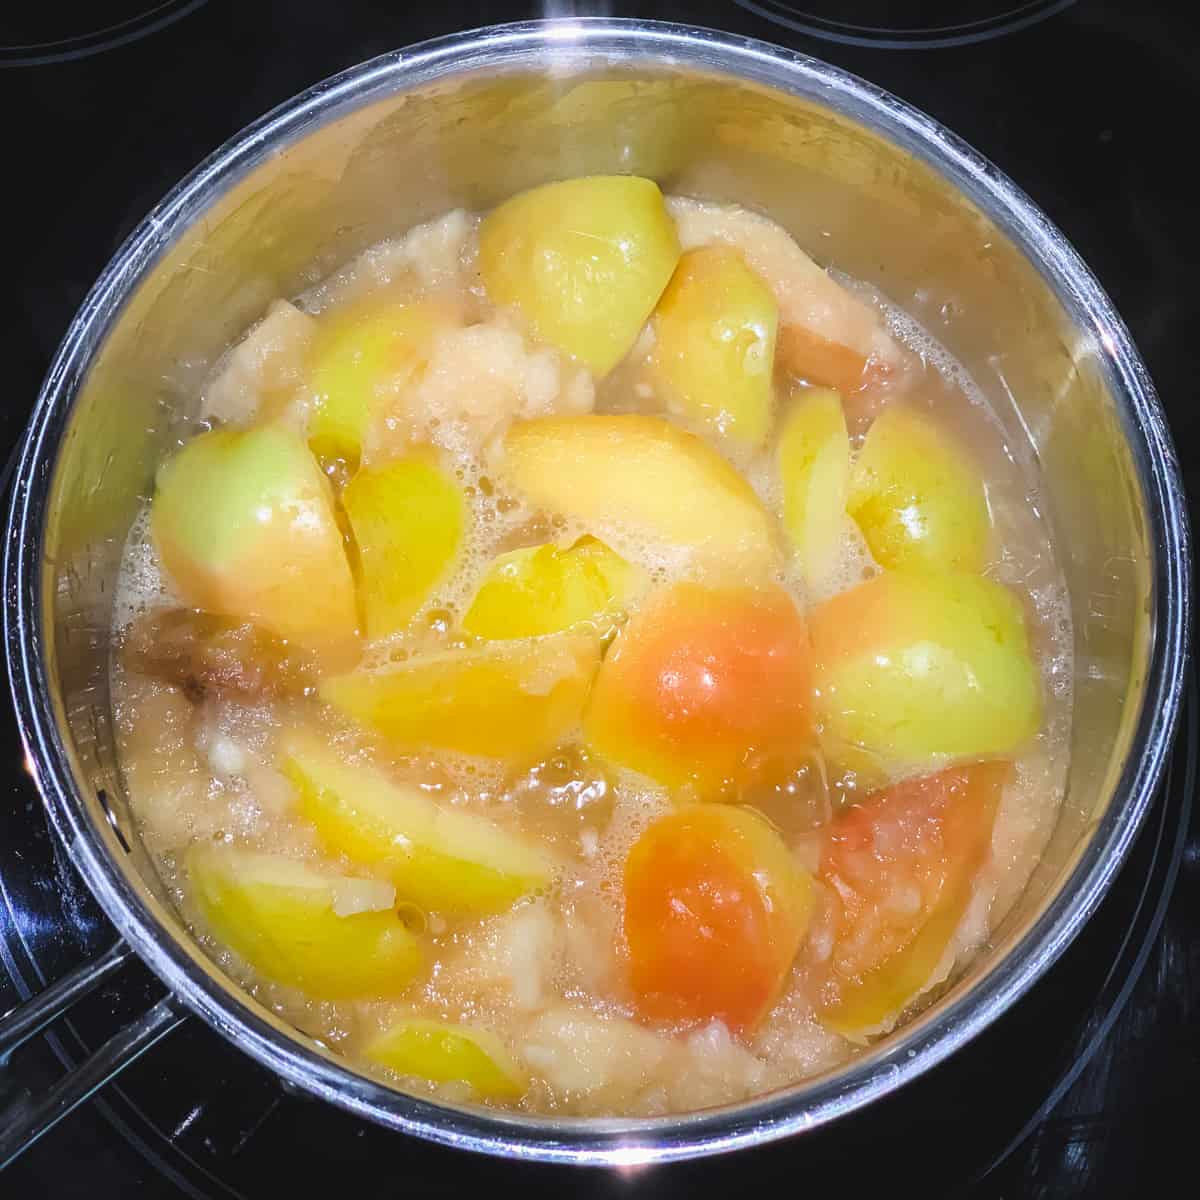 a pot of apples cooking on the stove